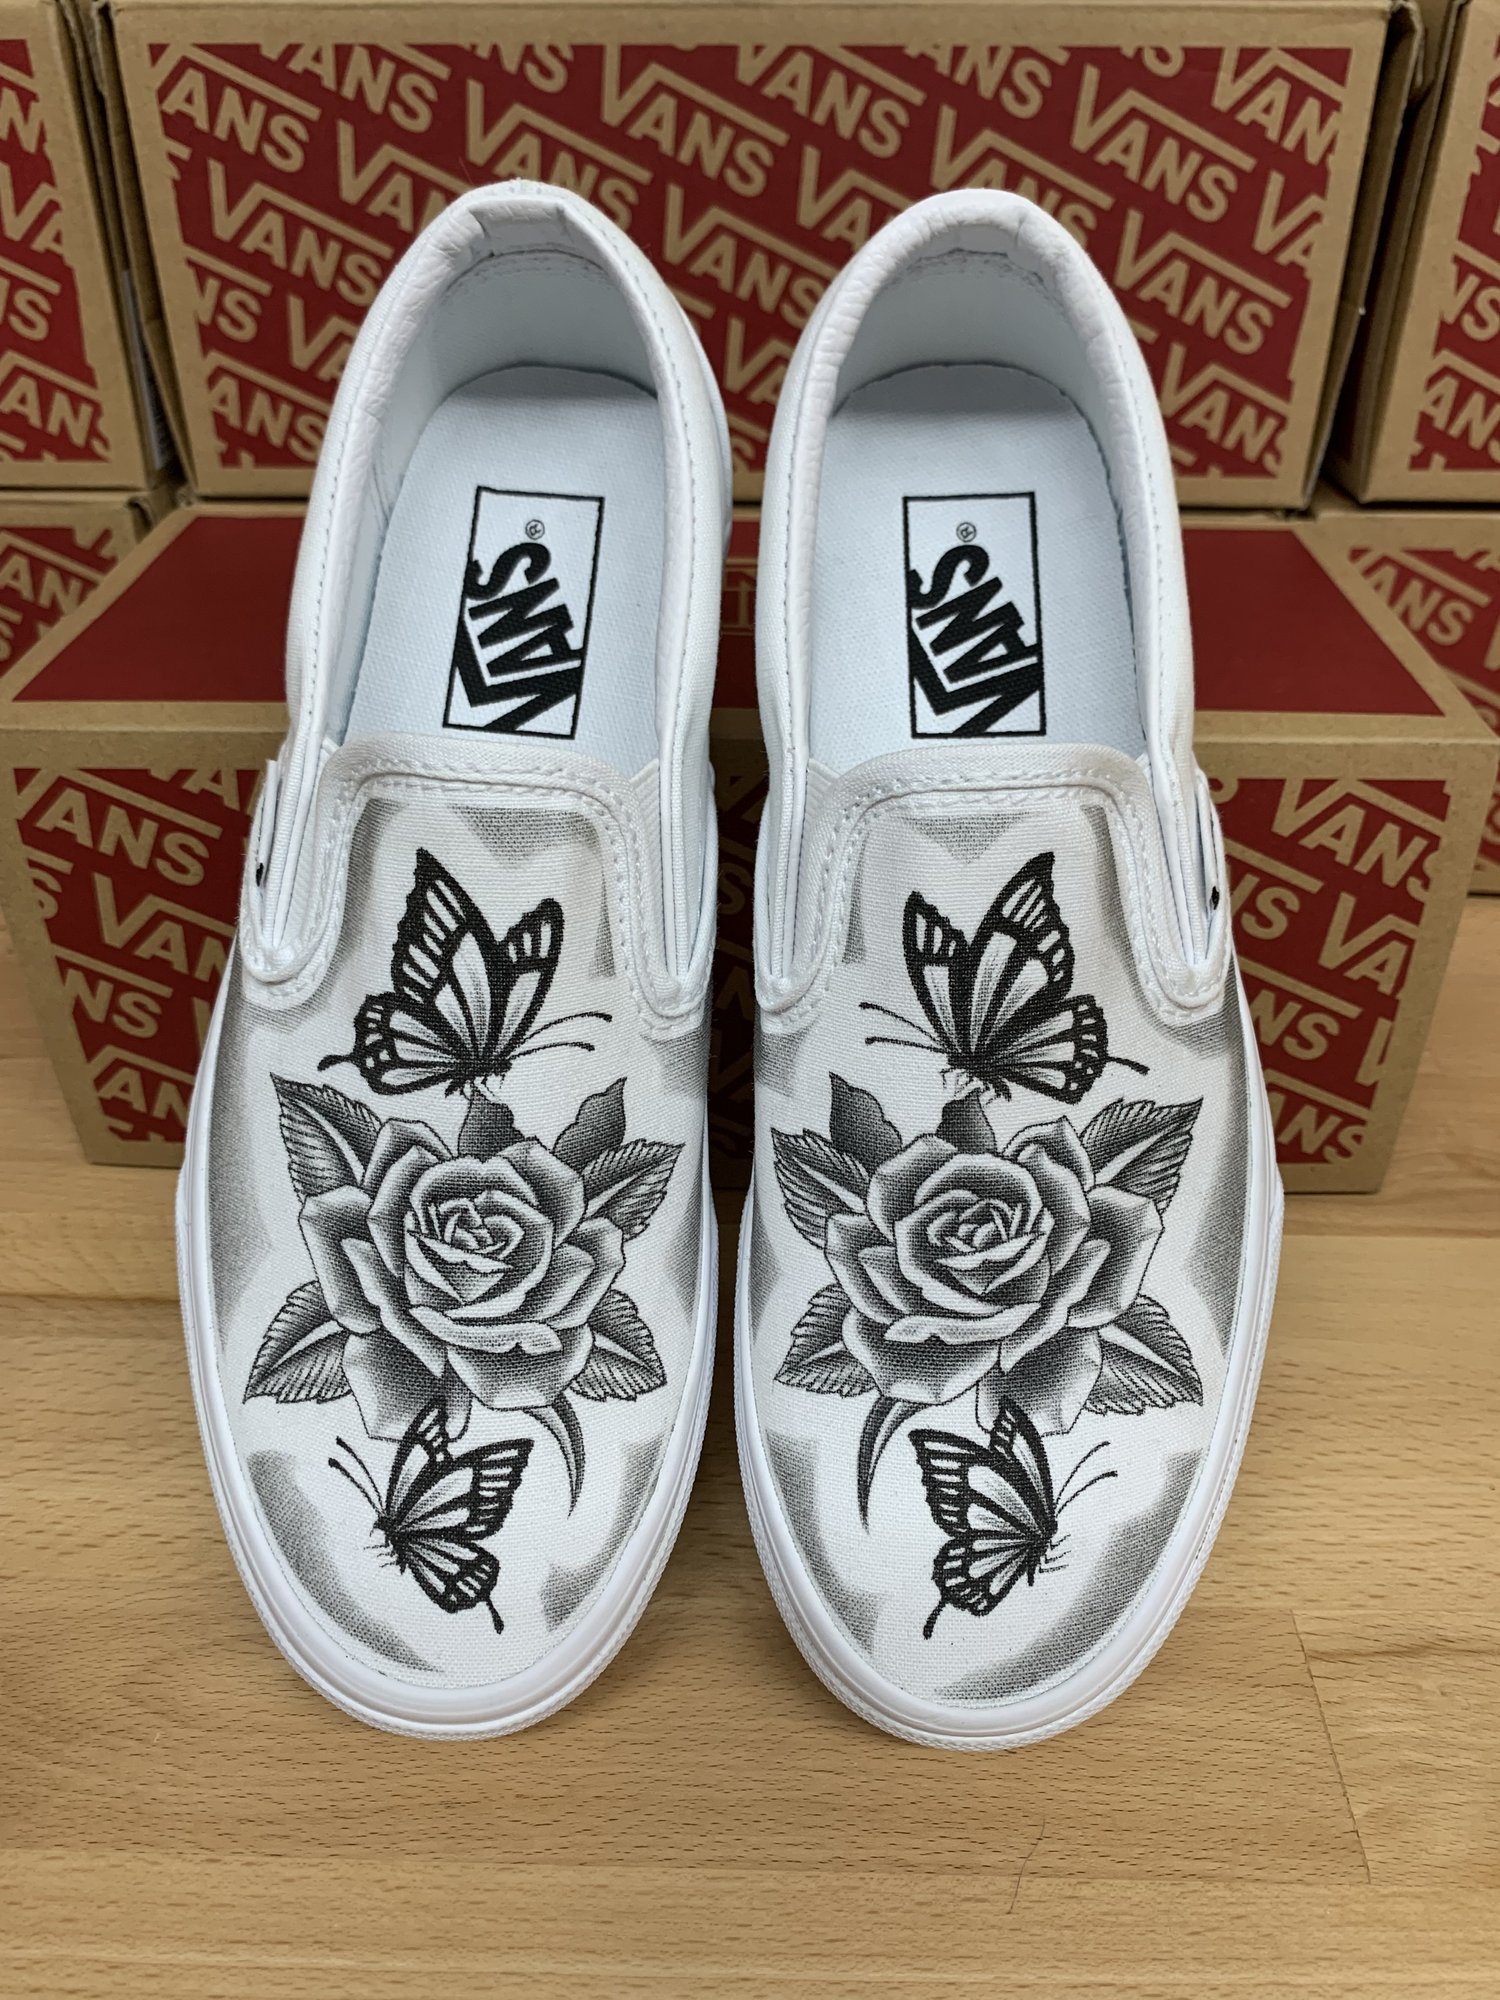 Custom Vans Shoes - Smile Now, Cry Later Design (Hand Drawn